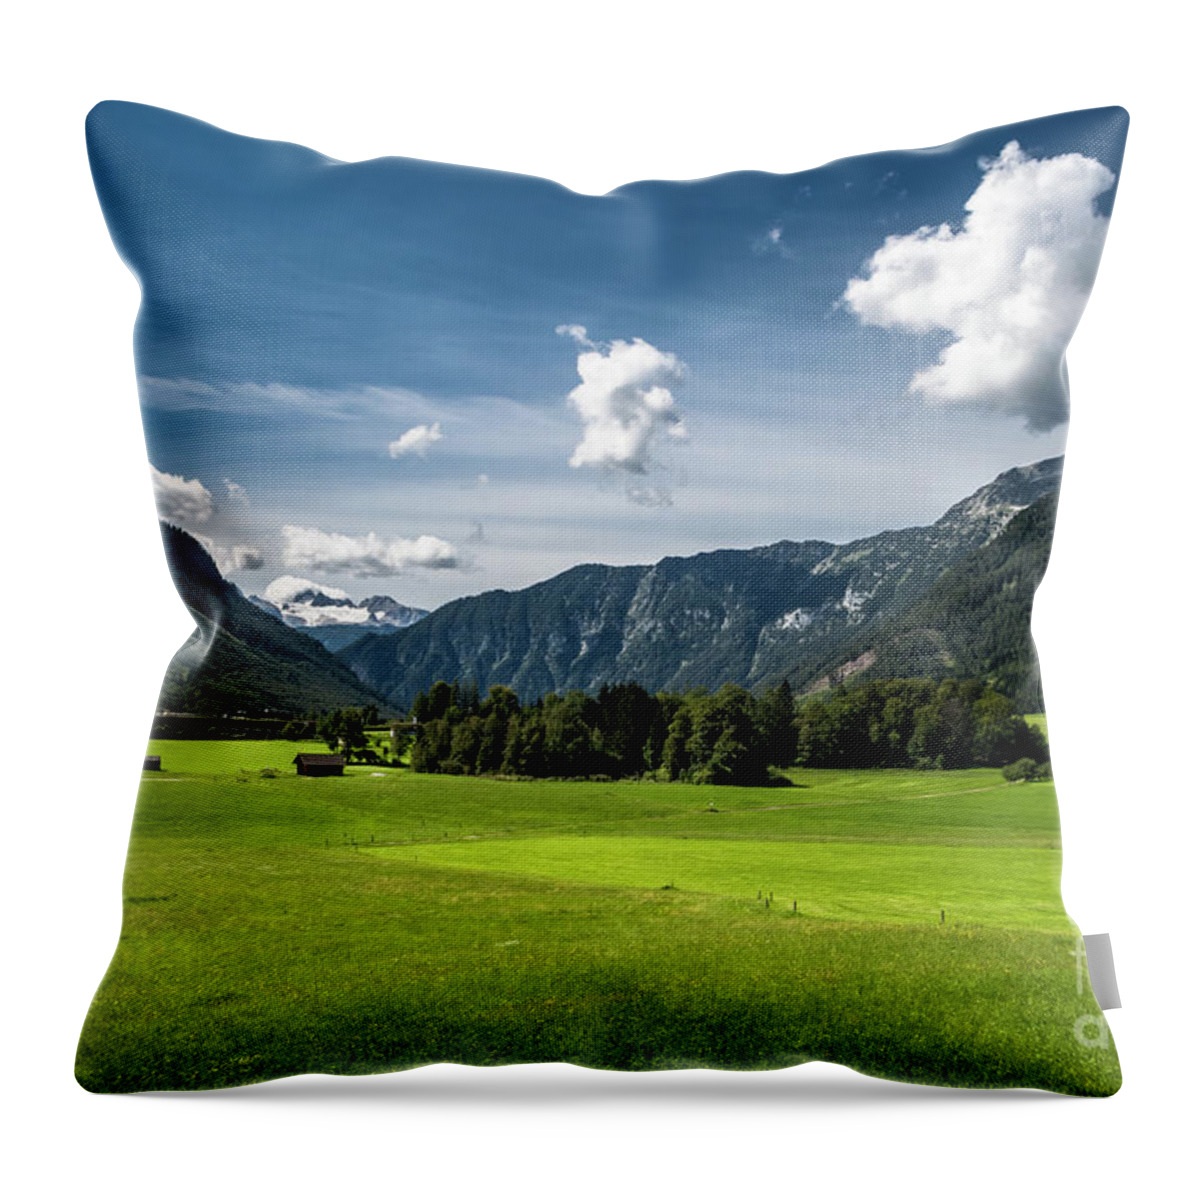 Austria Throw Pillow featuring the photograph Rural Landscape With Houses In Front Of Mountain Dachstein In The Alps Of Austria by Andreas Berthold